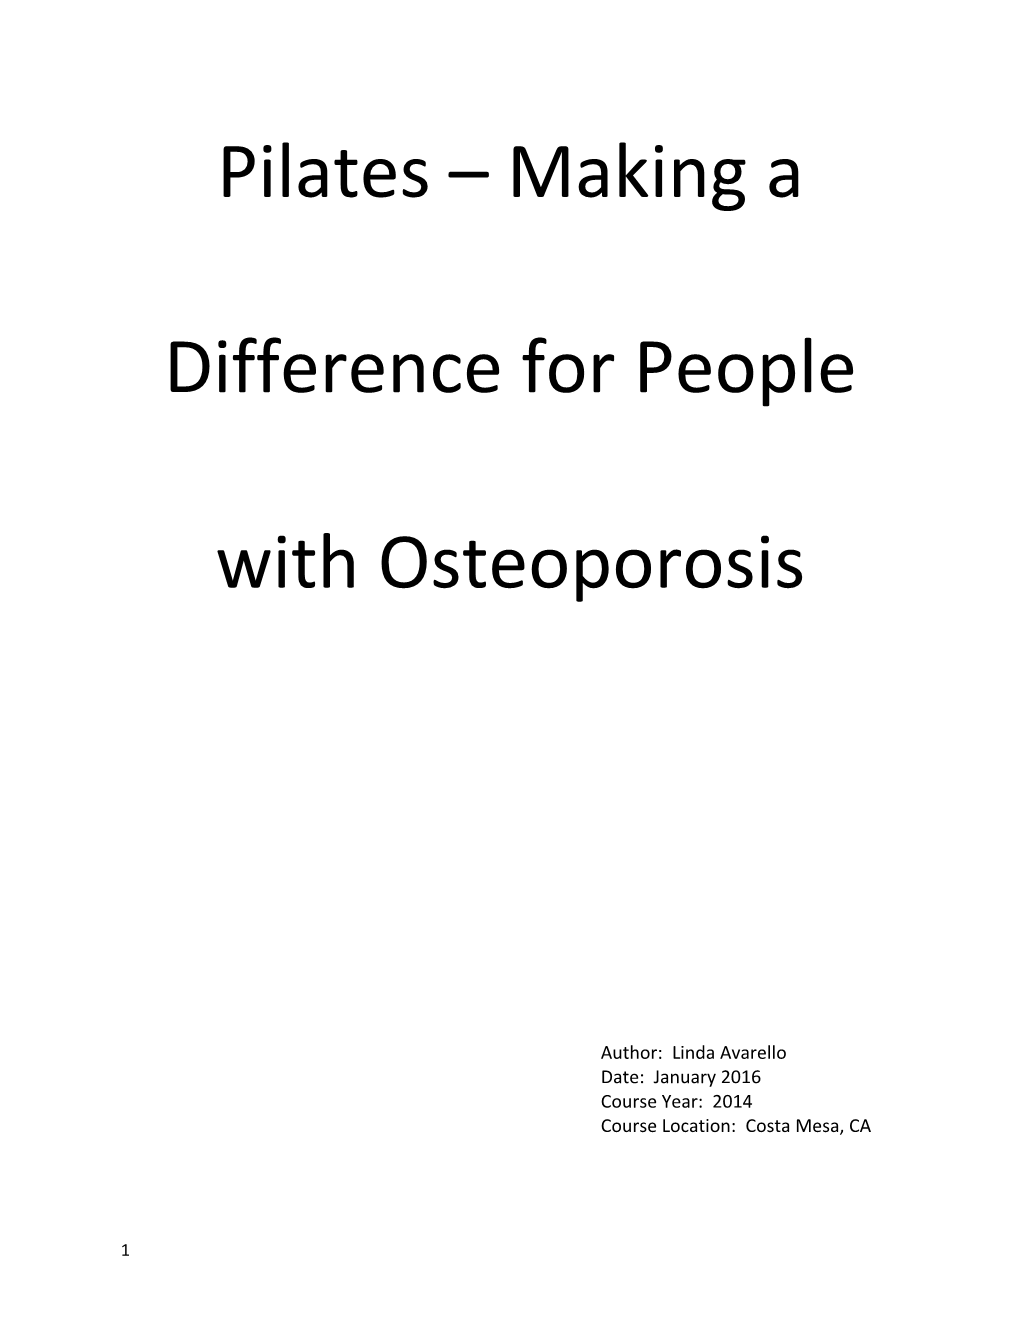 Pilates Making a Difference for People with Osteoporosis